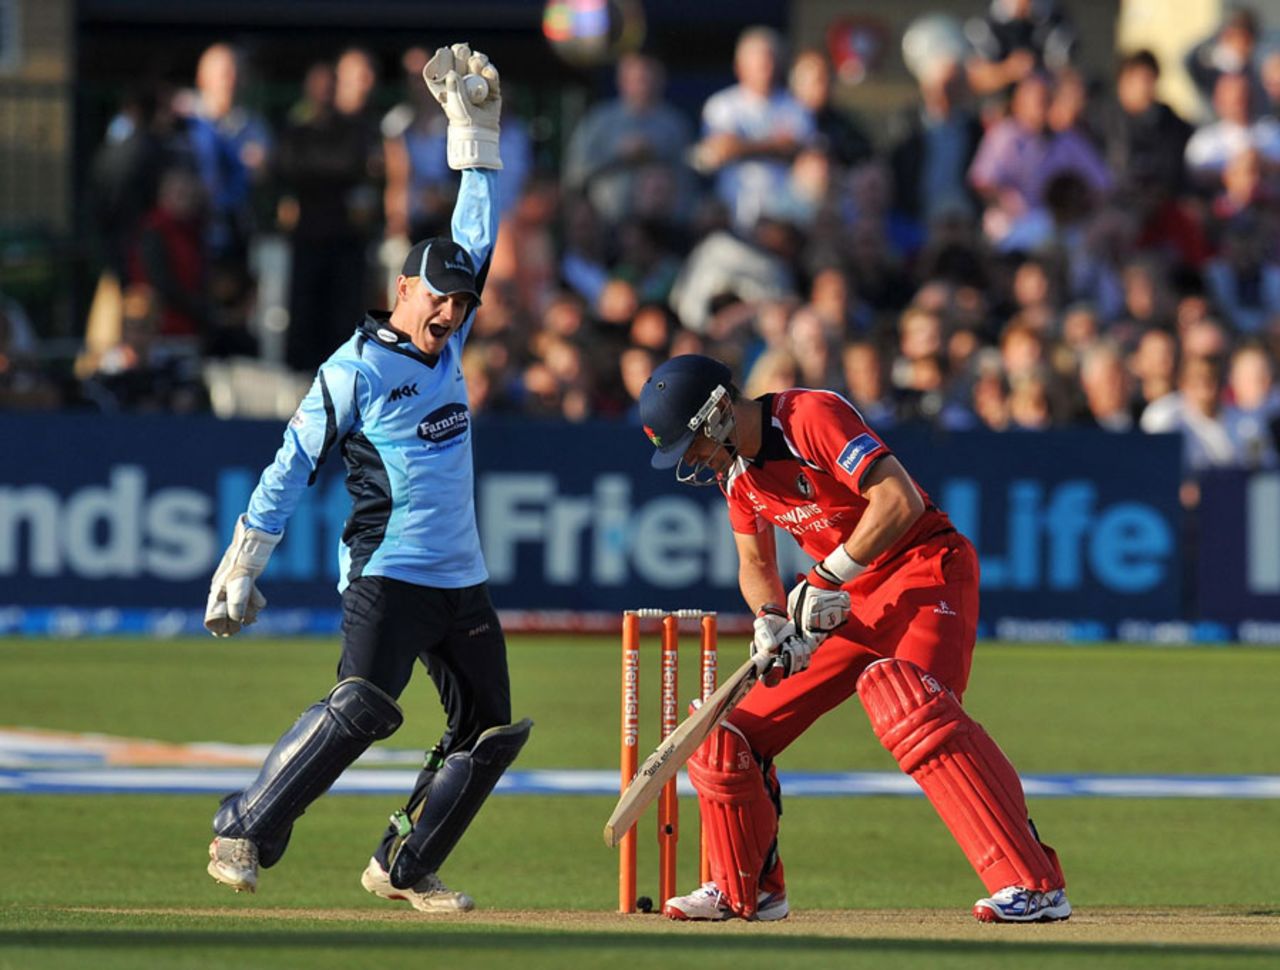 Stephen Moore is caught behind by Sussex's Ben Brown, Sussex v Lancashire, FLT20 quarter-final, Hove, August 8, 2011